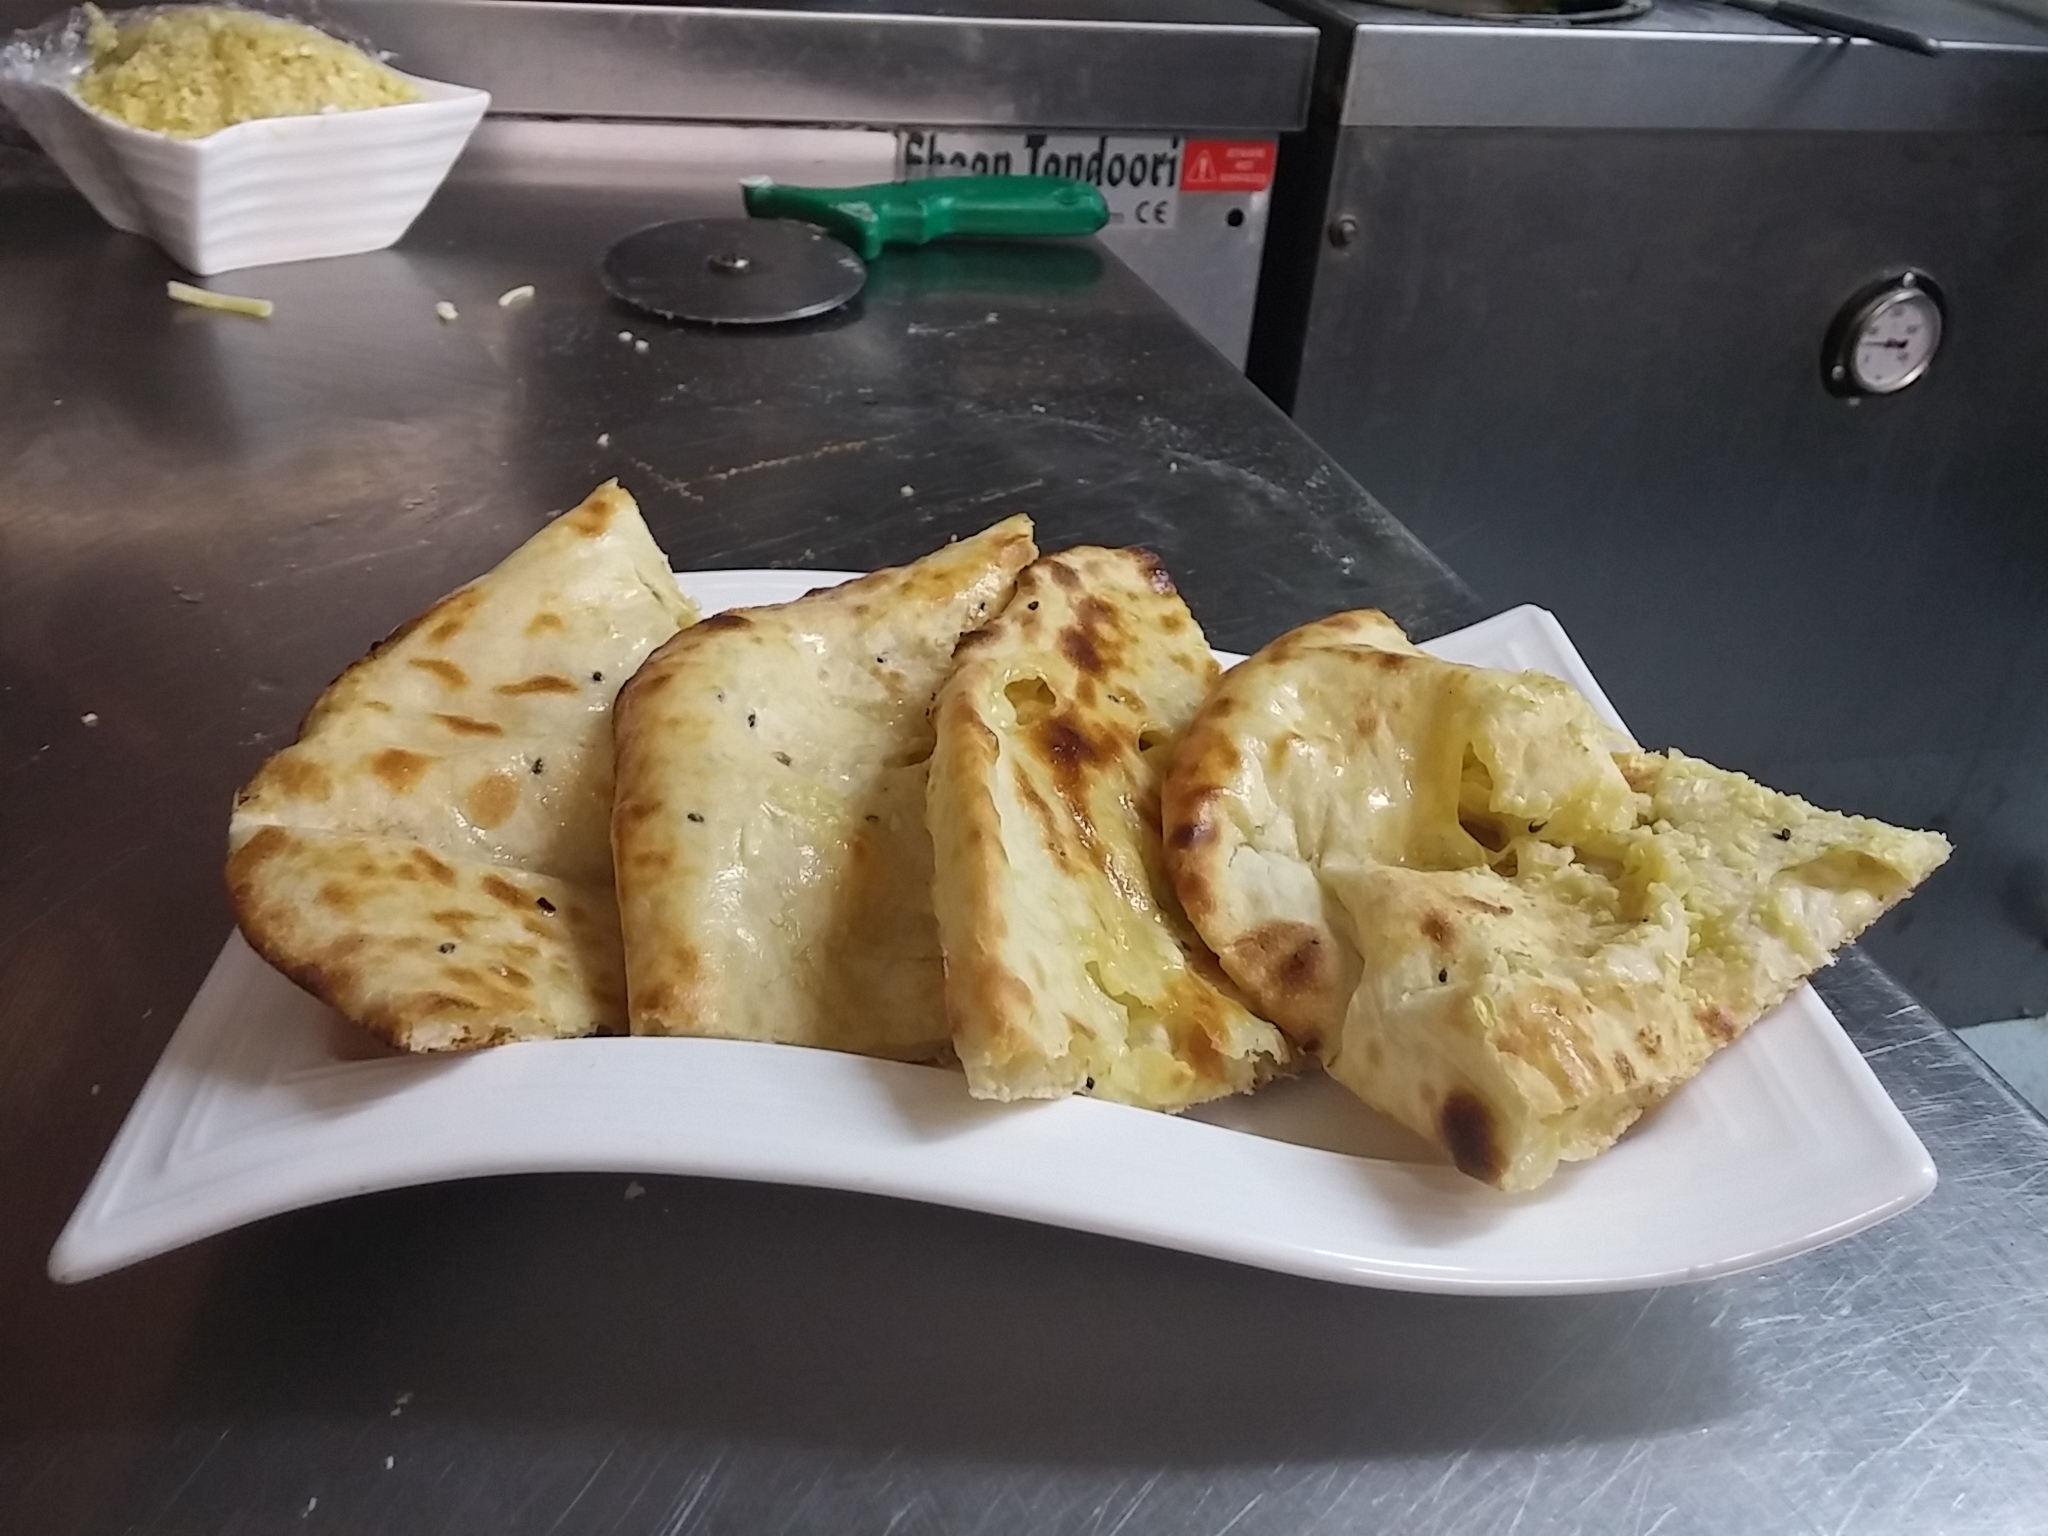 Hot from the tandoor, cheese and garlic naan cooked by the thoroughly fabulous Mr Singh himself